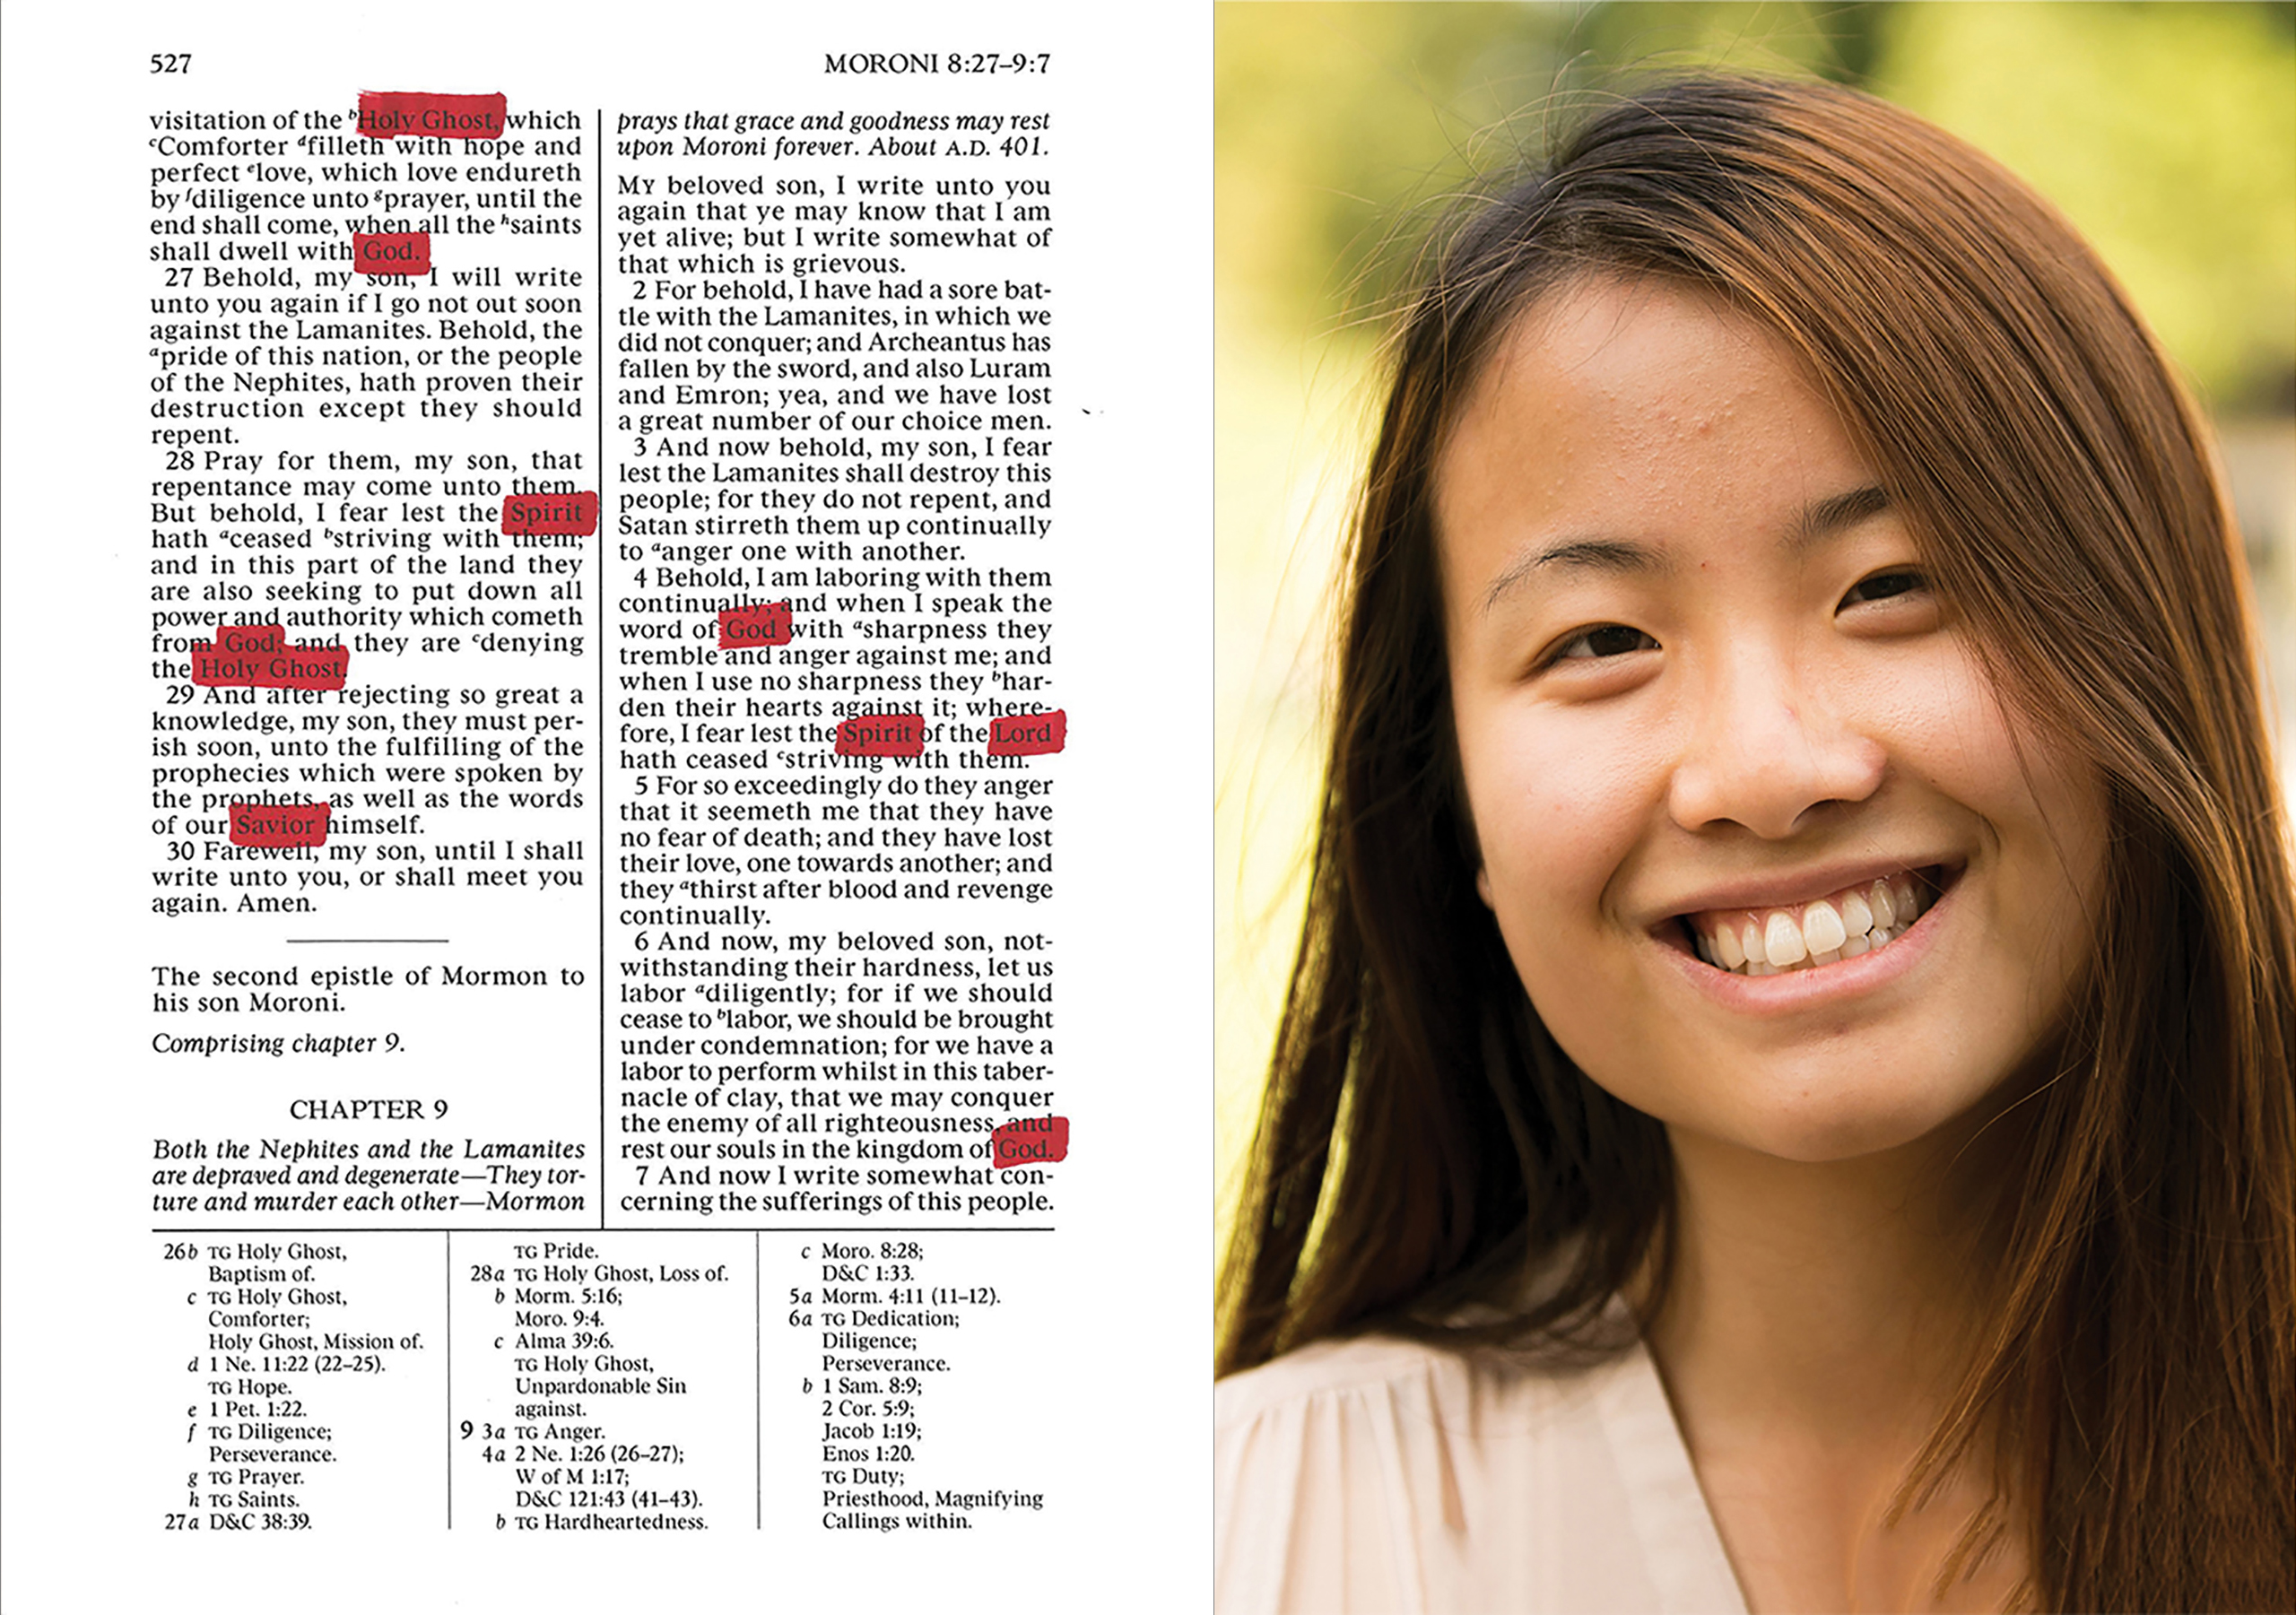 Katie, an agnostic woman from china, and the page of the Book of Mormon that she read.